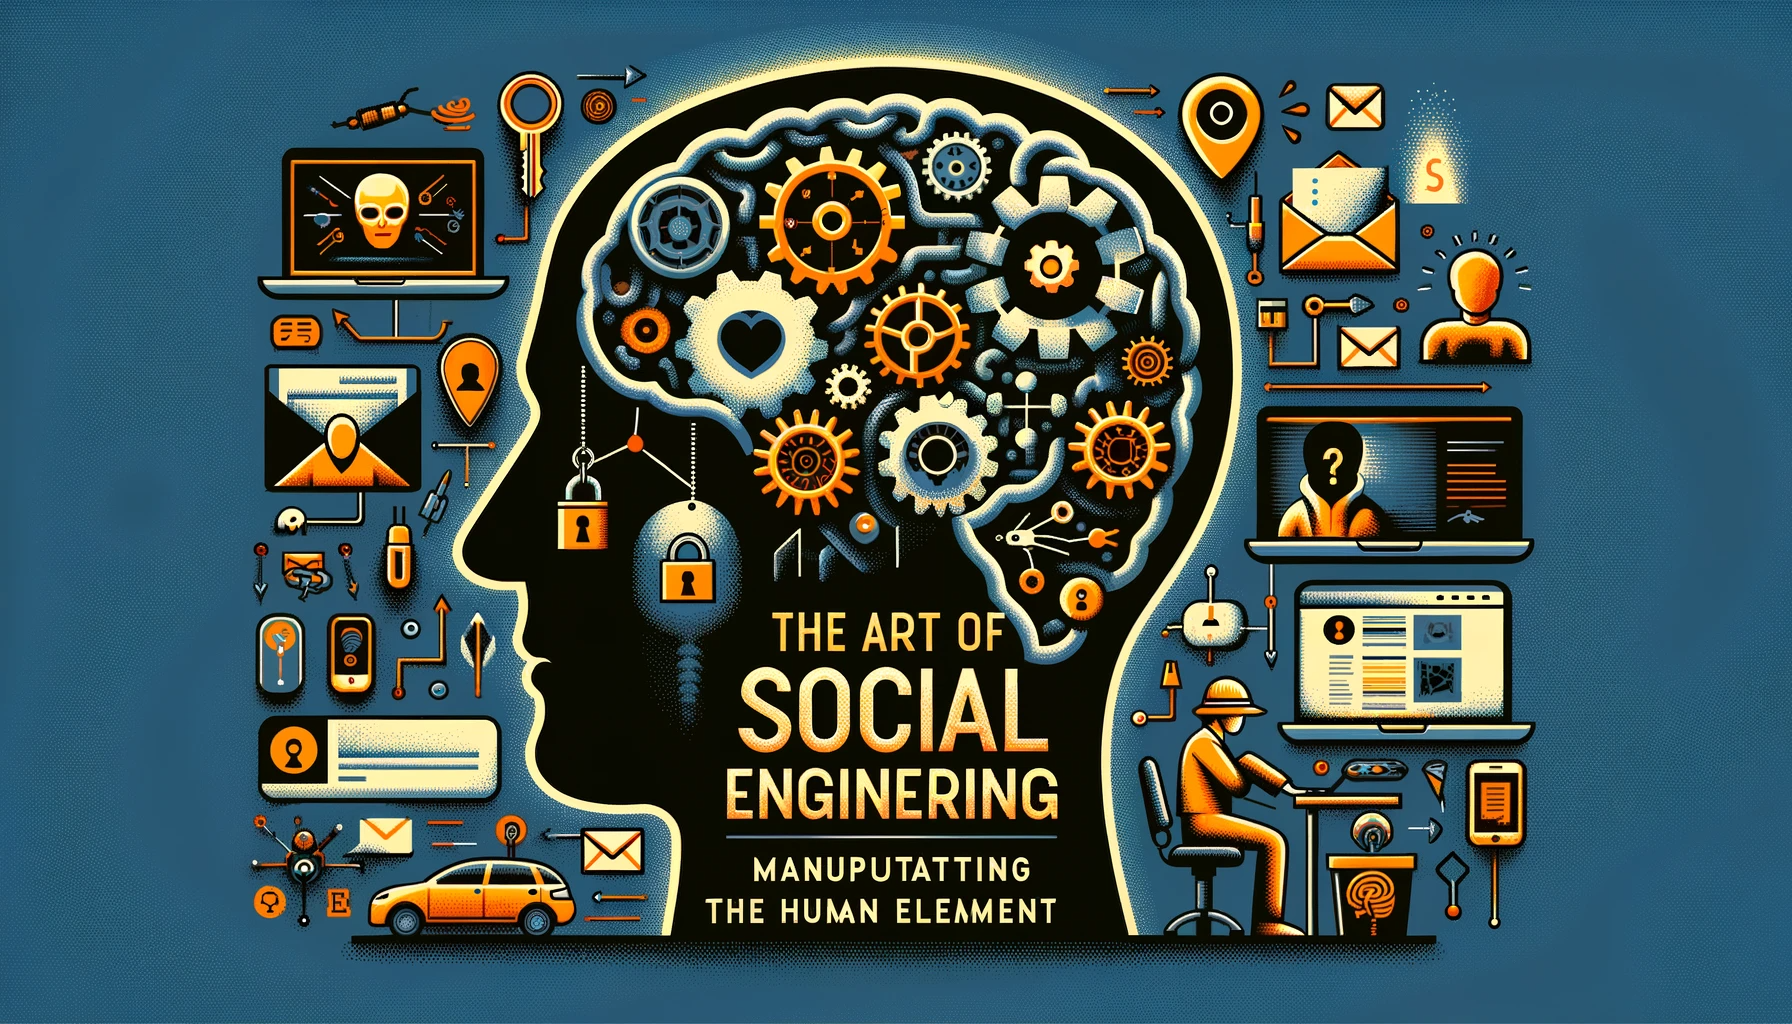 The Art of Social Engineering: Manipulating the Human Element